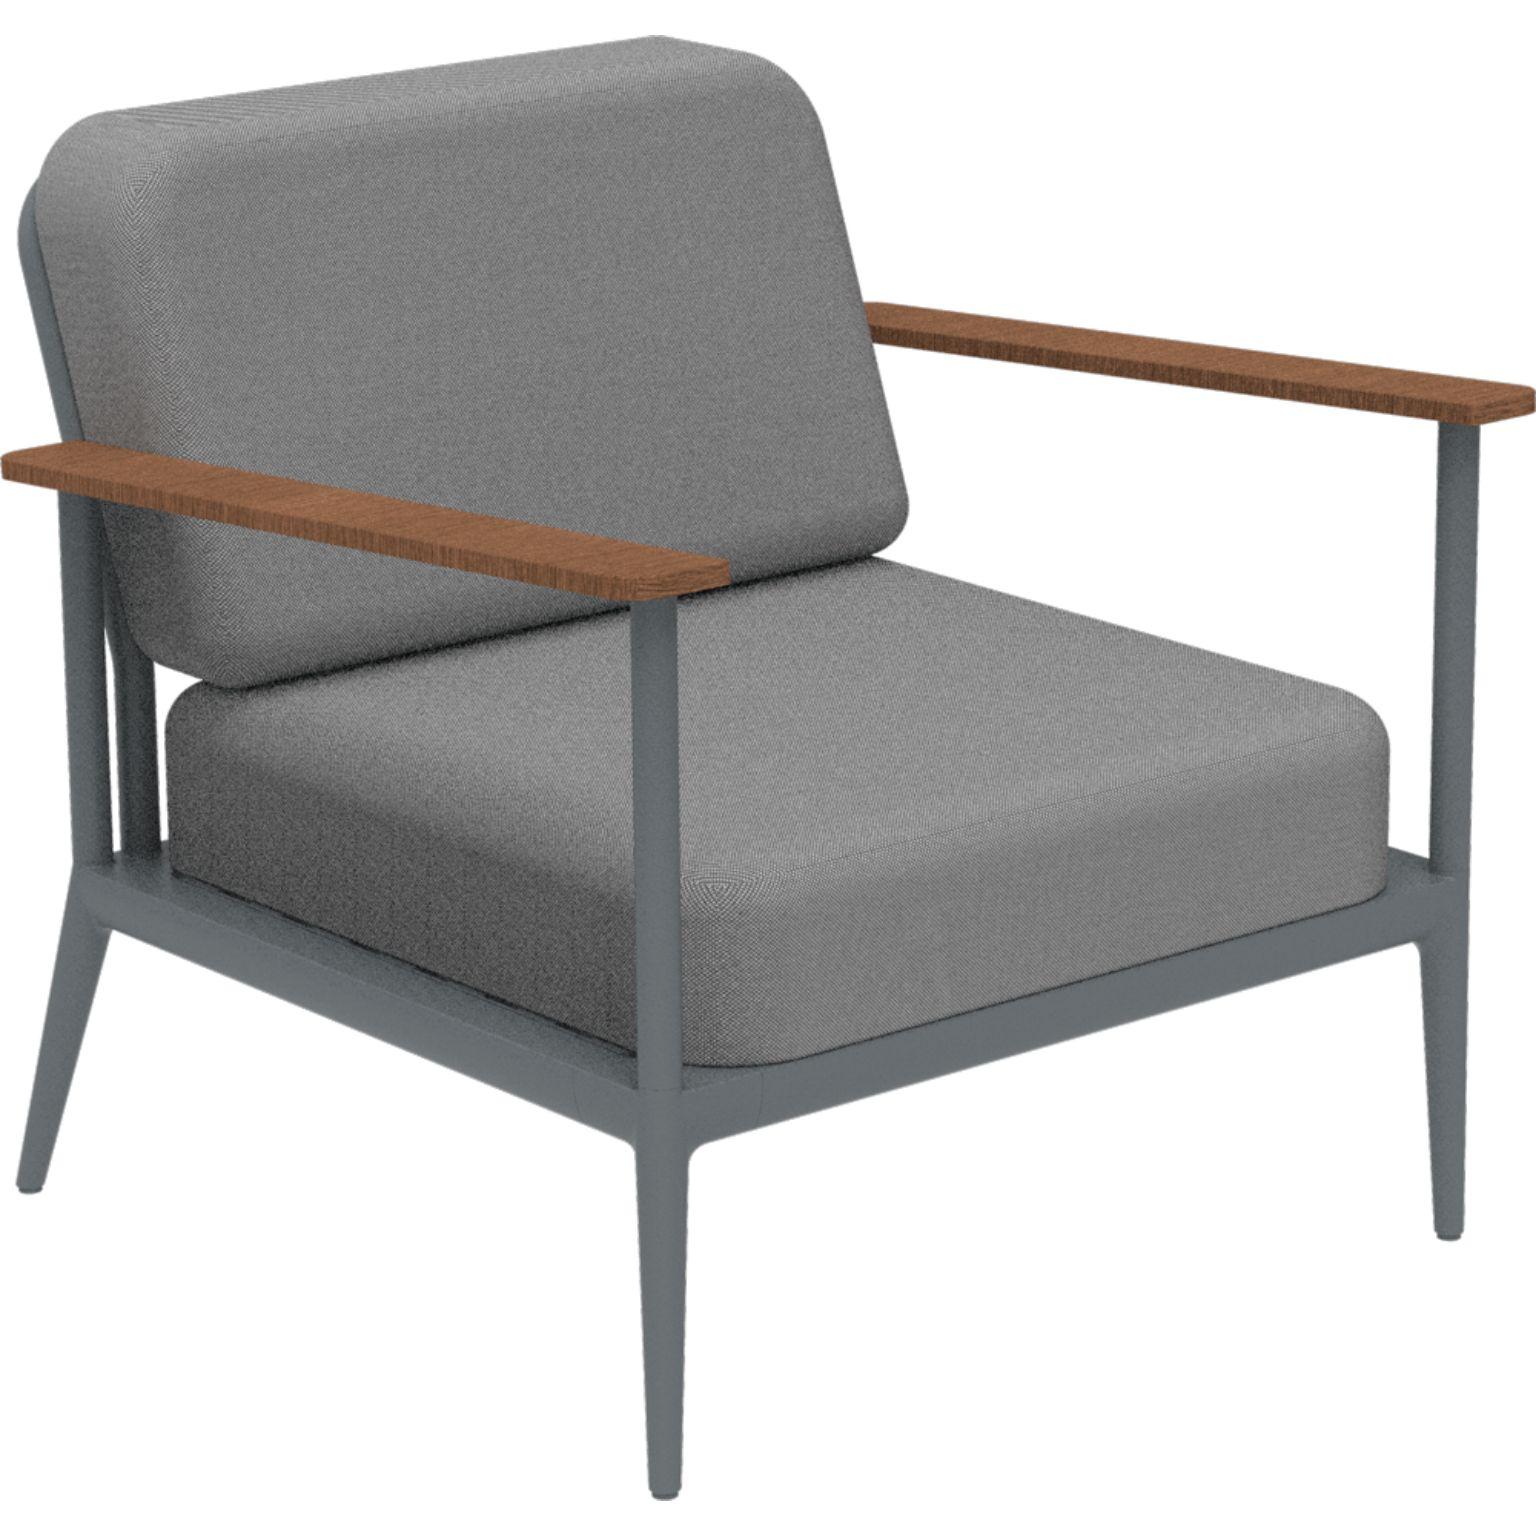 Nature grey longue chair by MOWEE.
Dimensions: D85 x W83 x H81 cm (seat height 42 cm).
Material: aluminum, upholstery and Iroko wood.
Weight: 20 kg.
Also available in different colors and finishes.

An unmistakable collection for its beauty